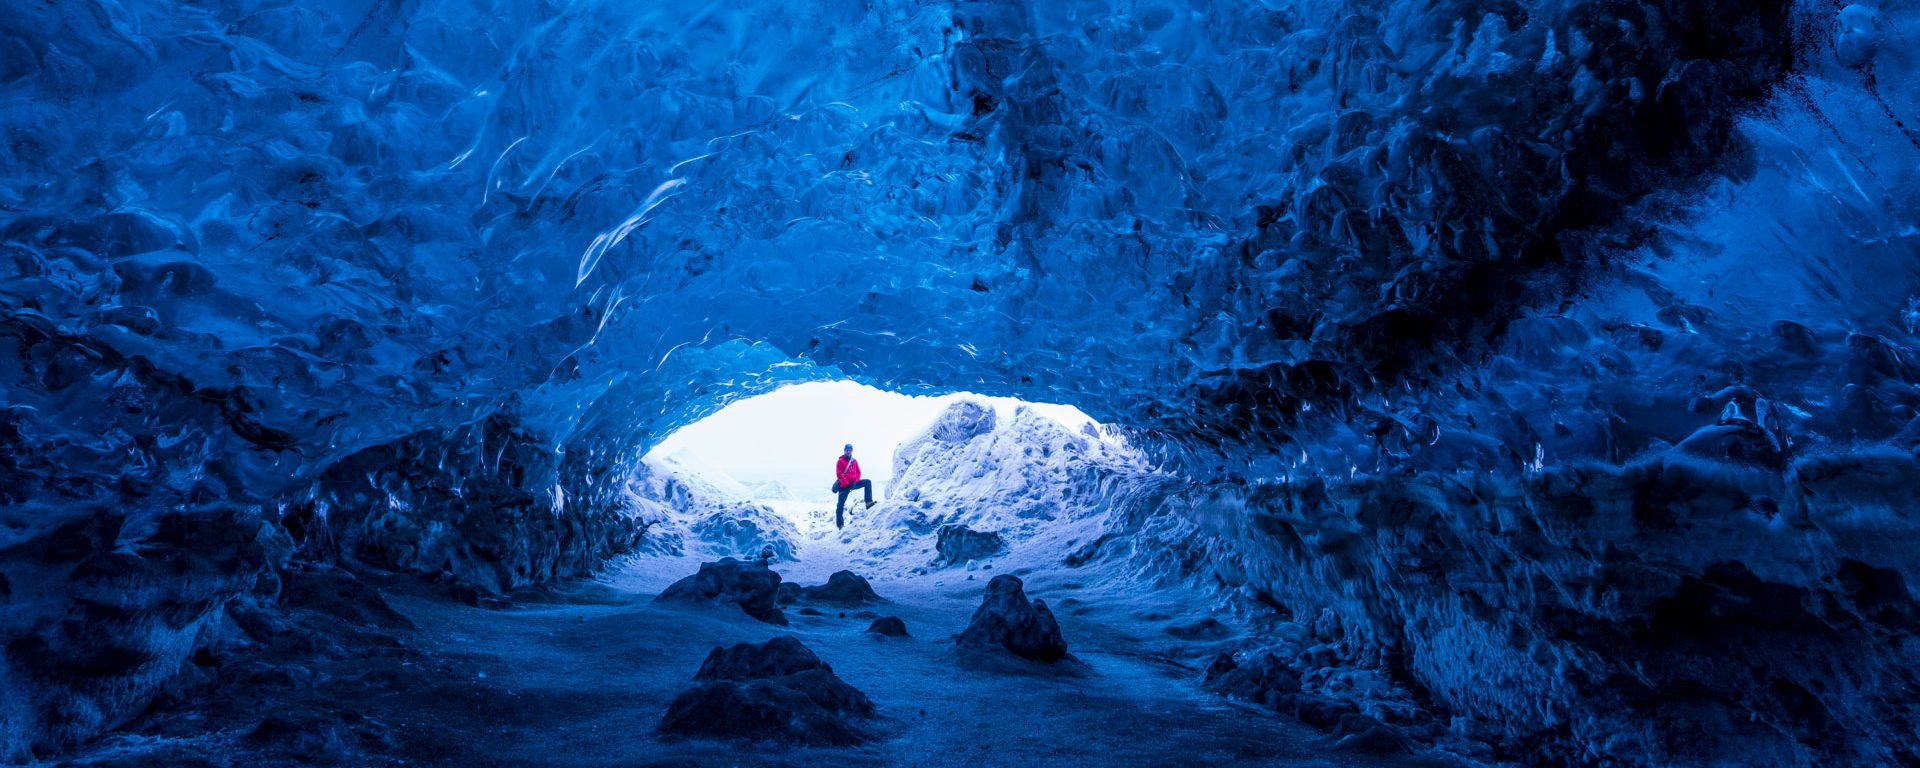 Man standing at entrance to an ice cave beneath a glacier, Iceland